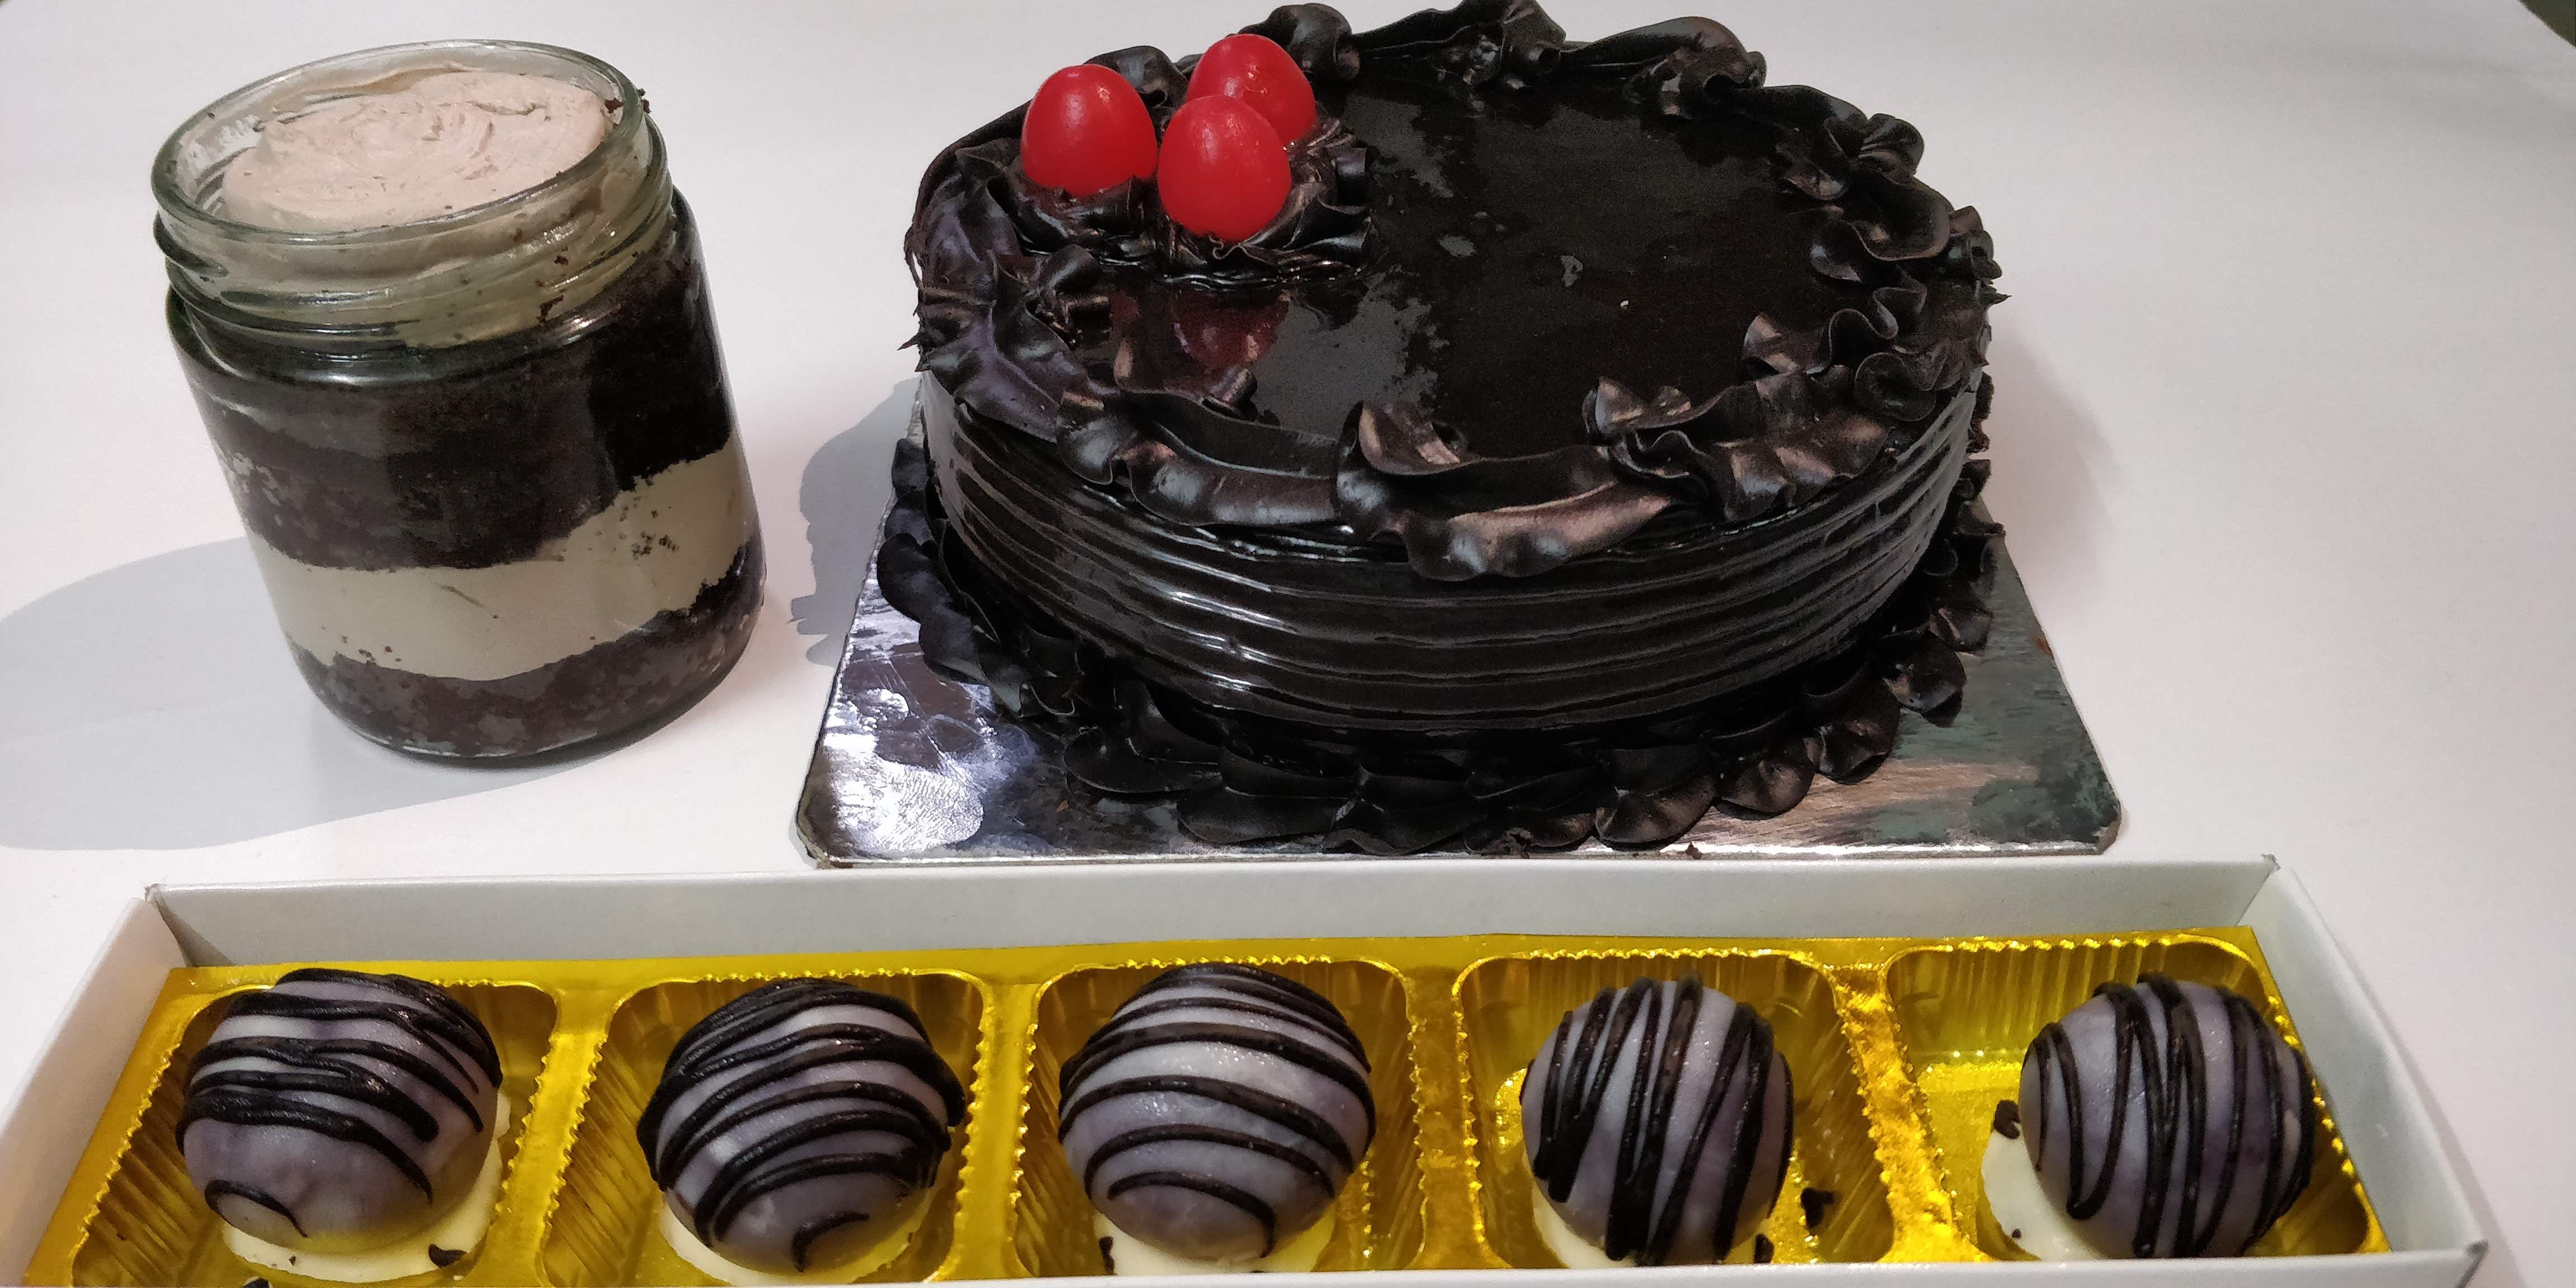 Buy 180 Degree Oven Fresh Cake - Chocolate Truffle Online at Best Price of  Rs null - bigbasket